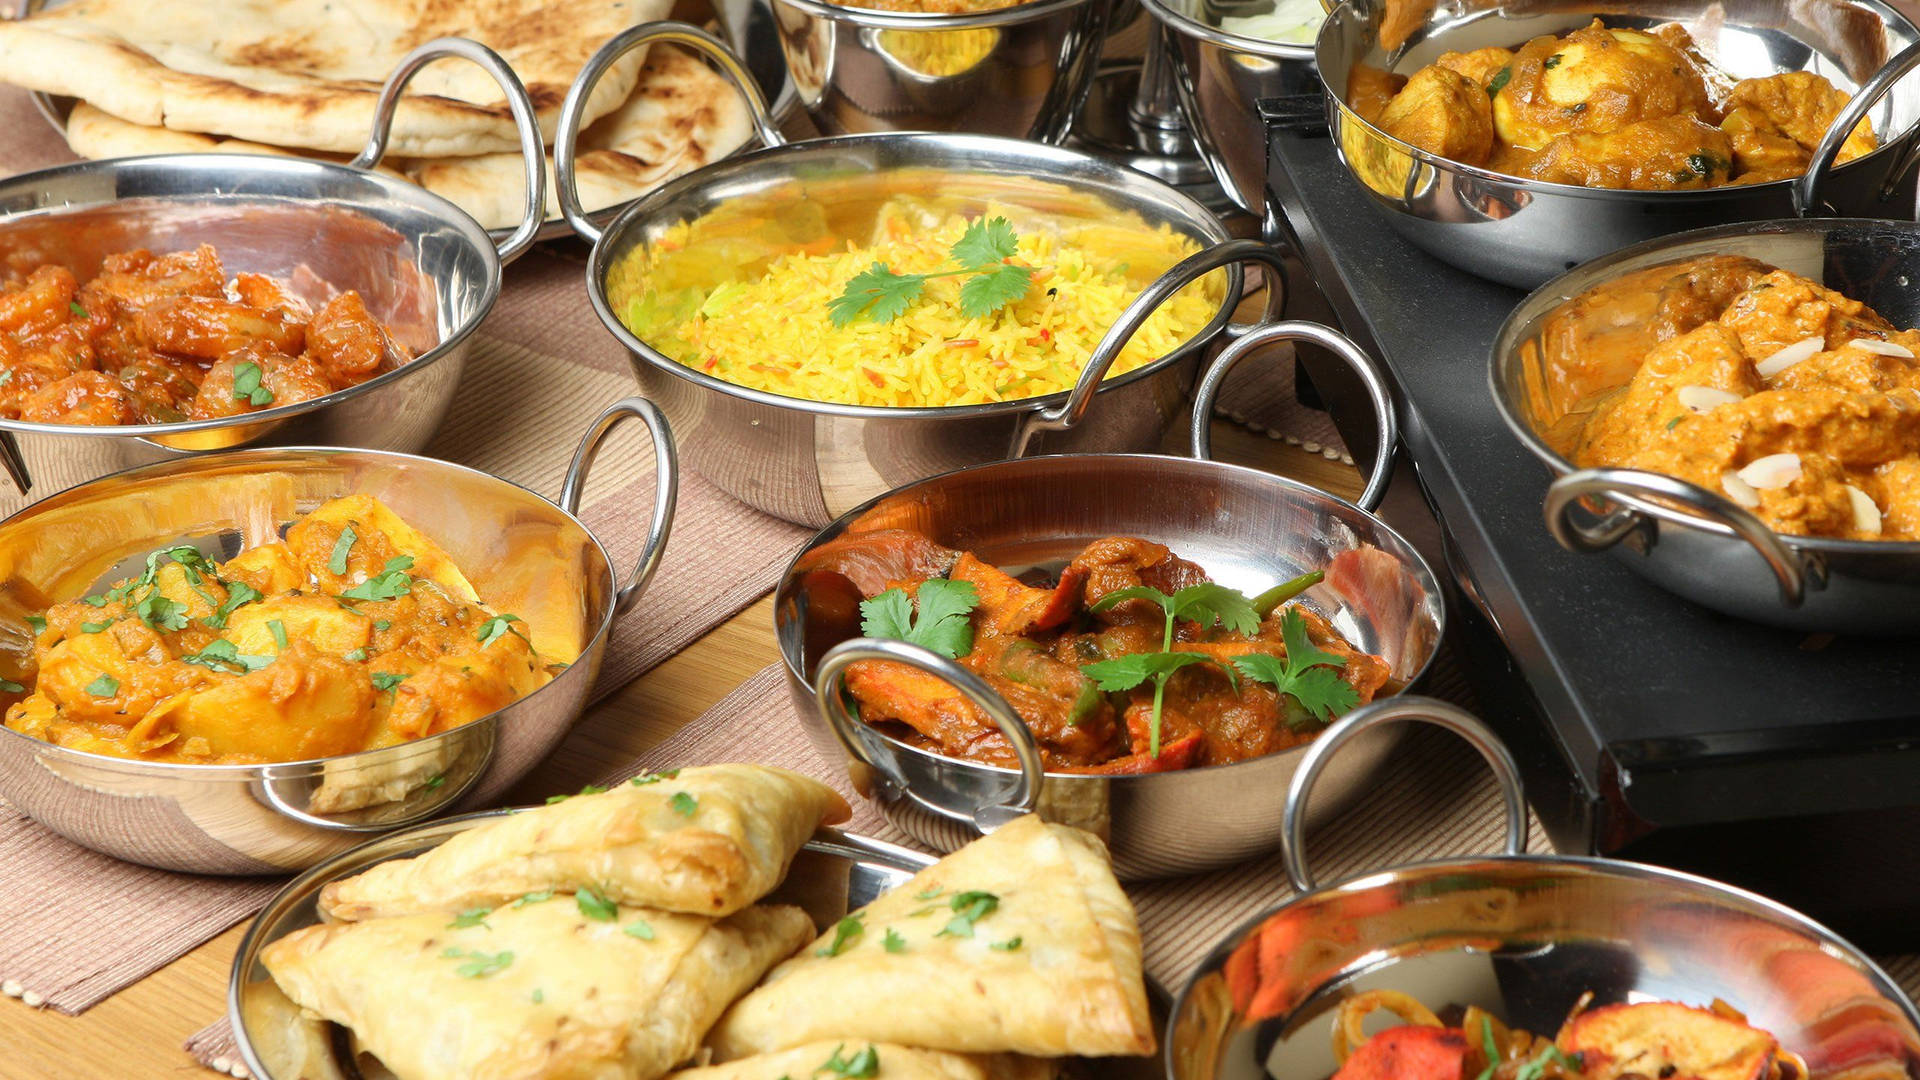 Indian Food Dishes